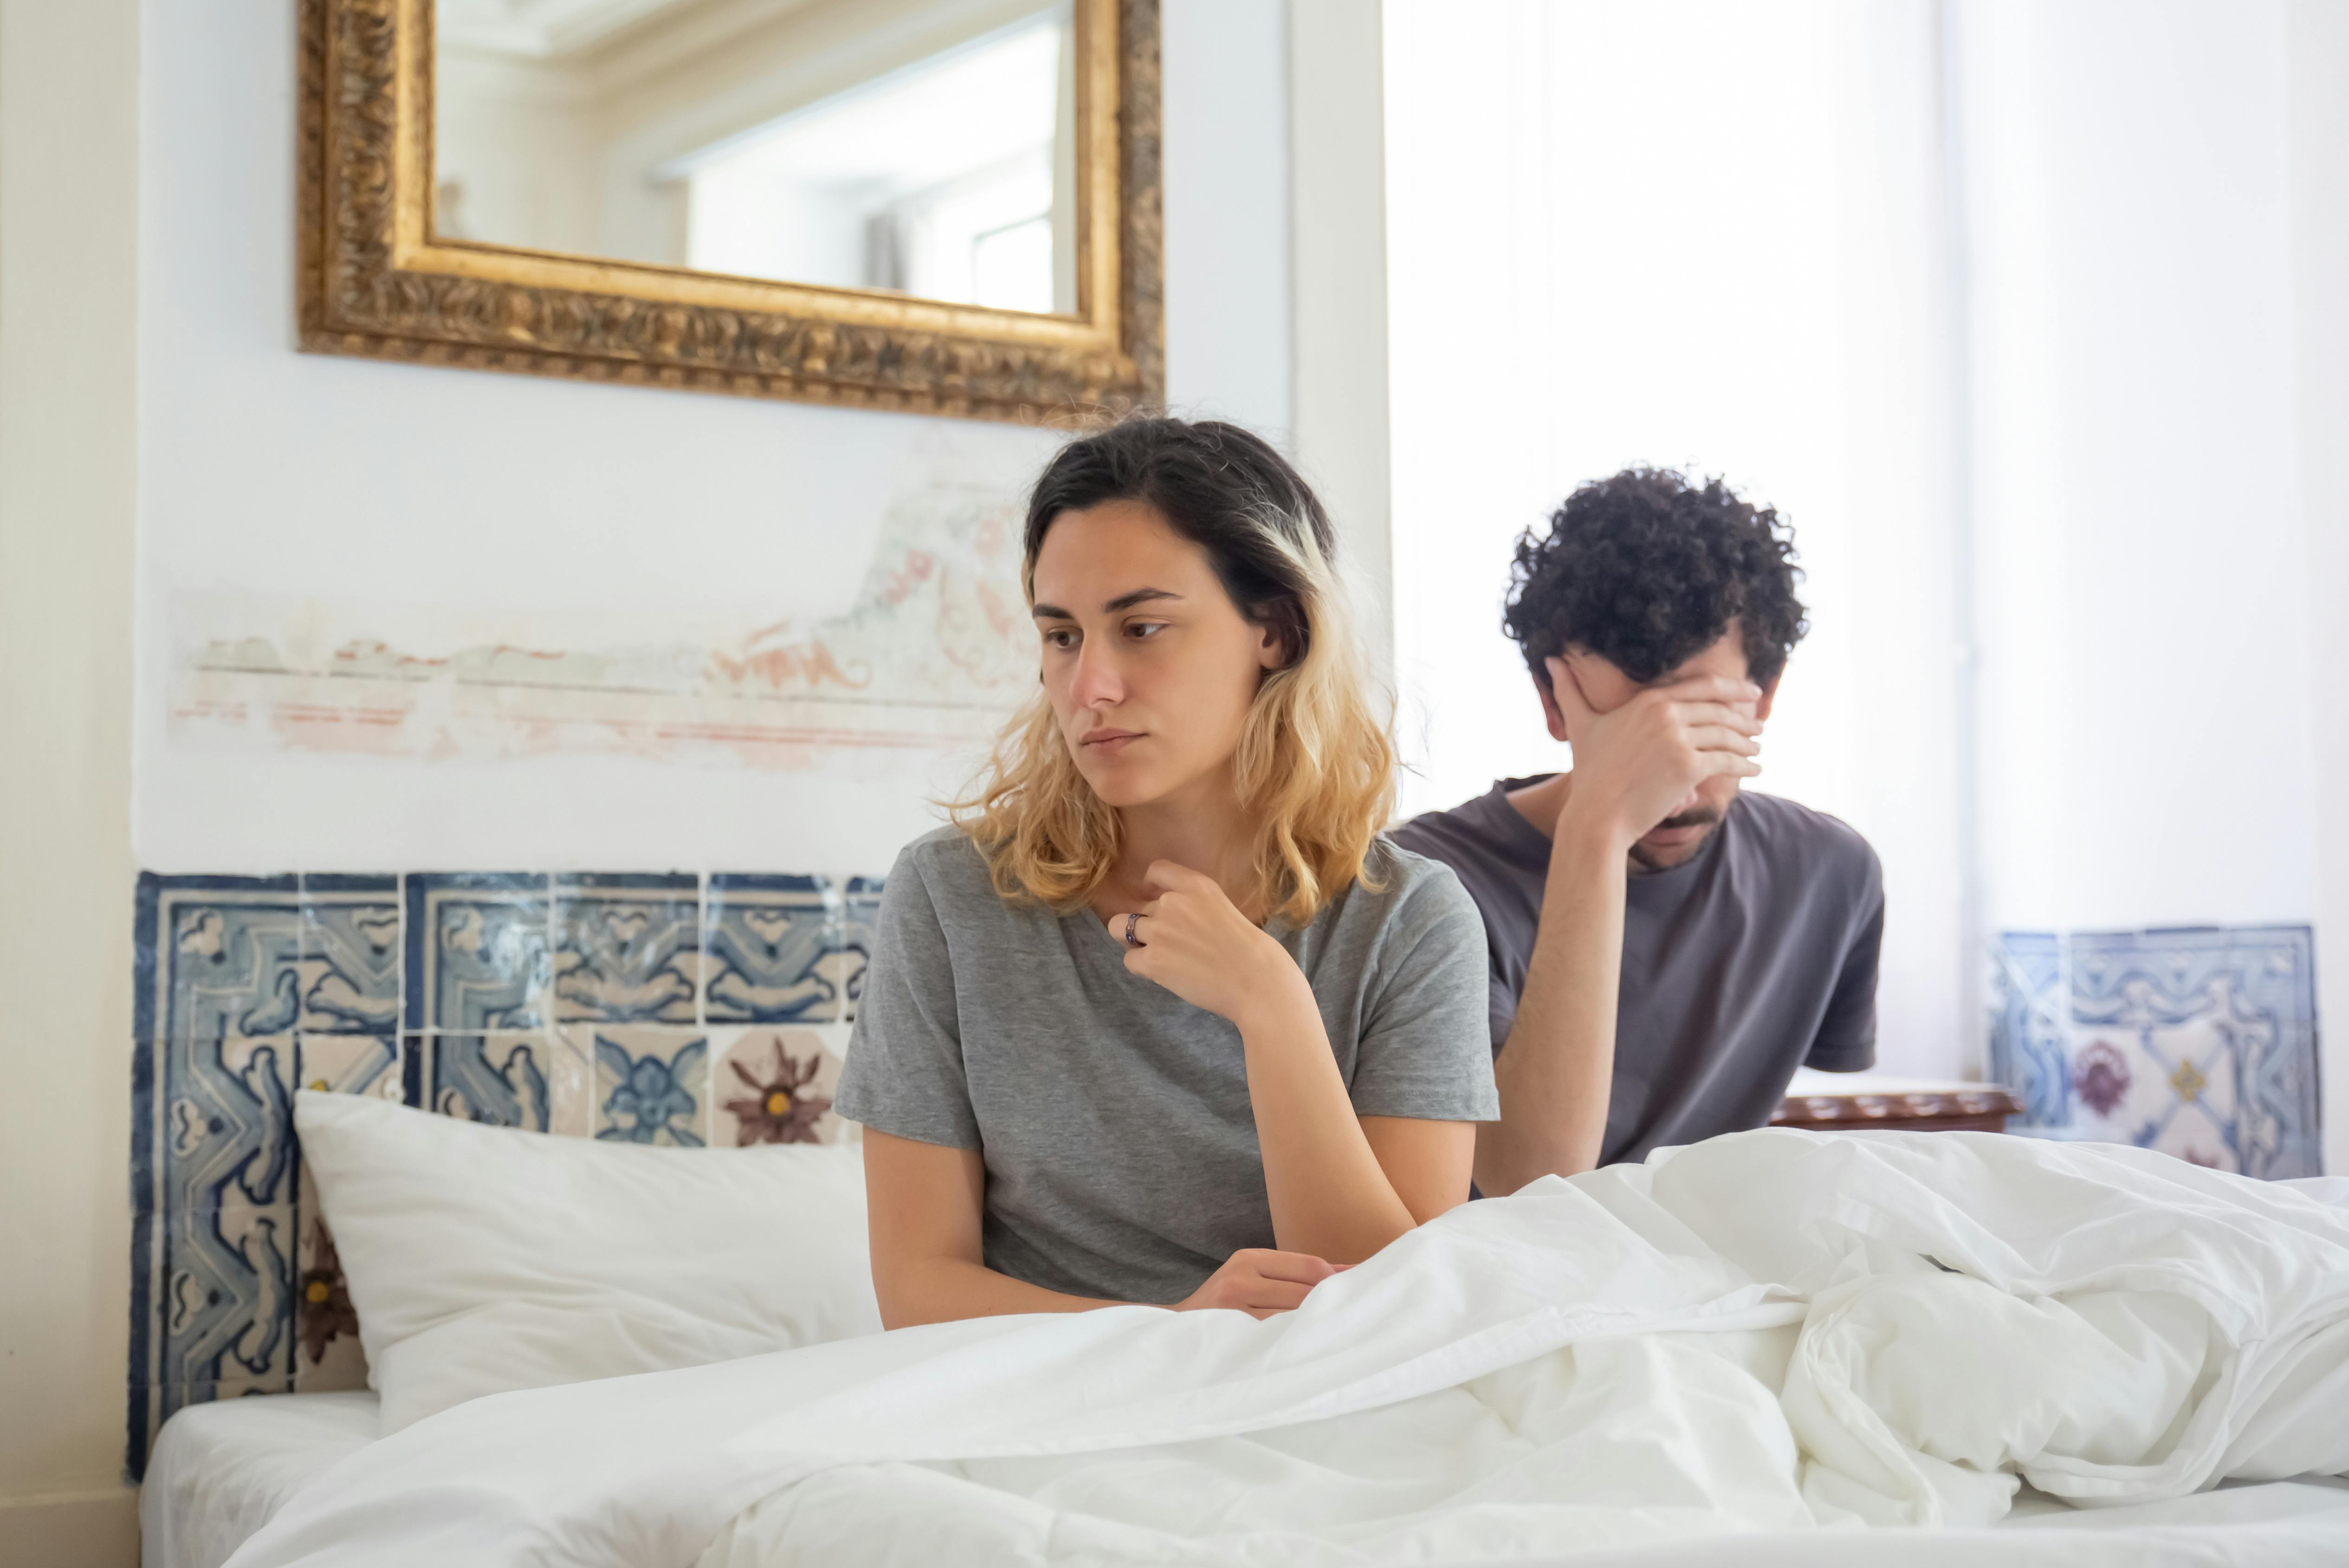 An upset couple seated on a bed | Source: Pexels